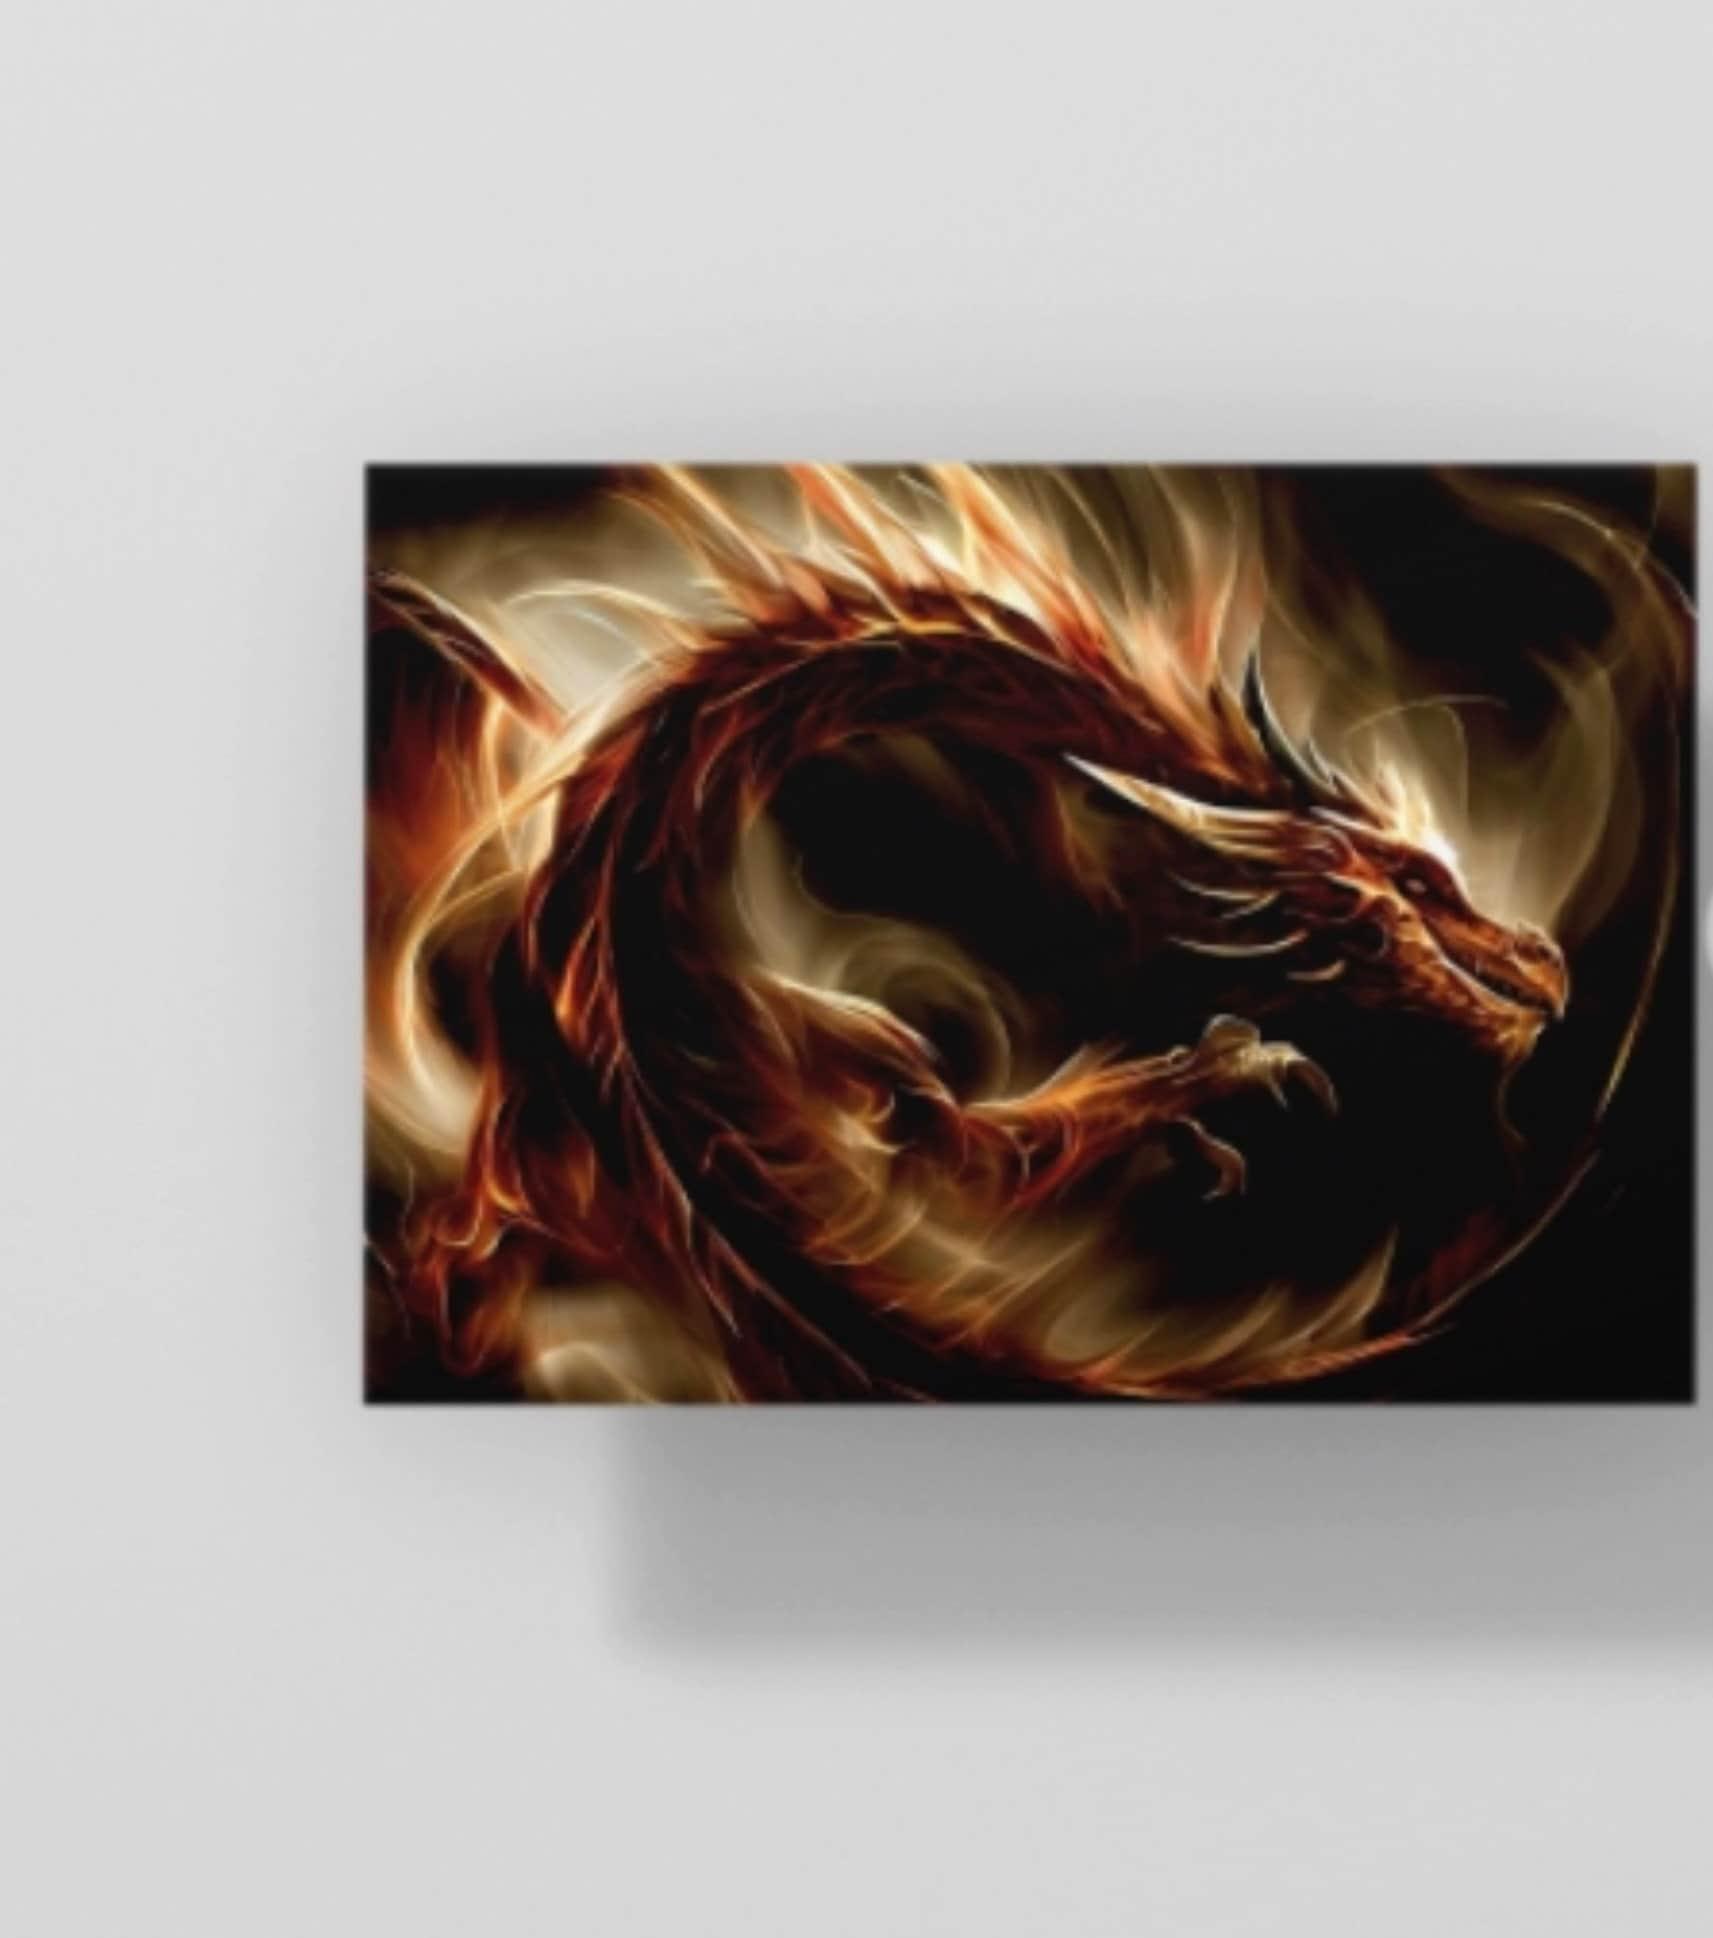 Dragon - Greeting Cards, Birthday Card, Large Notecards